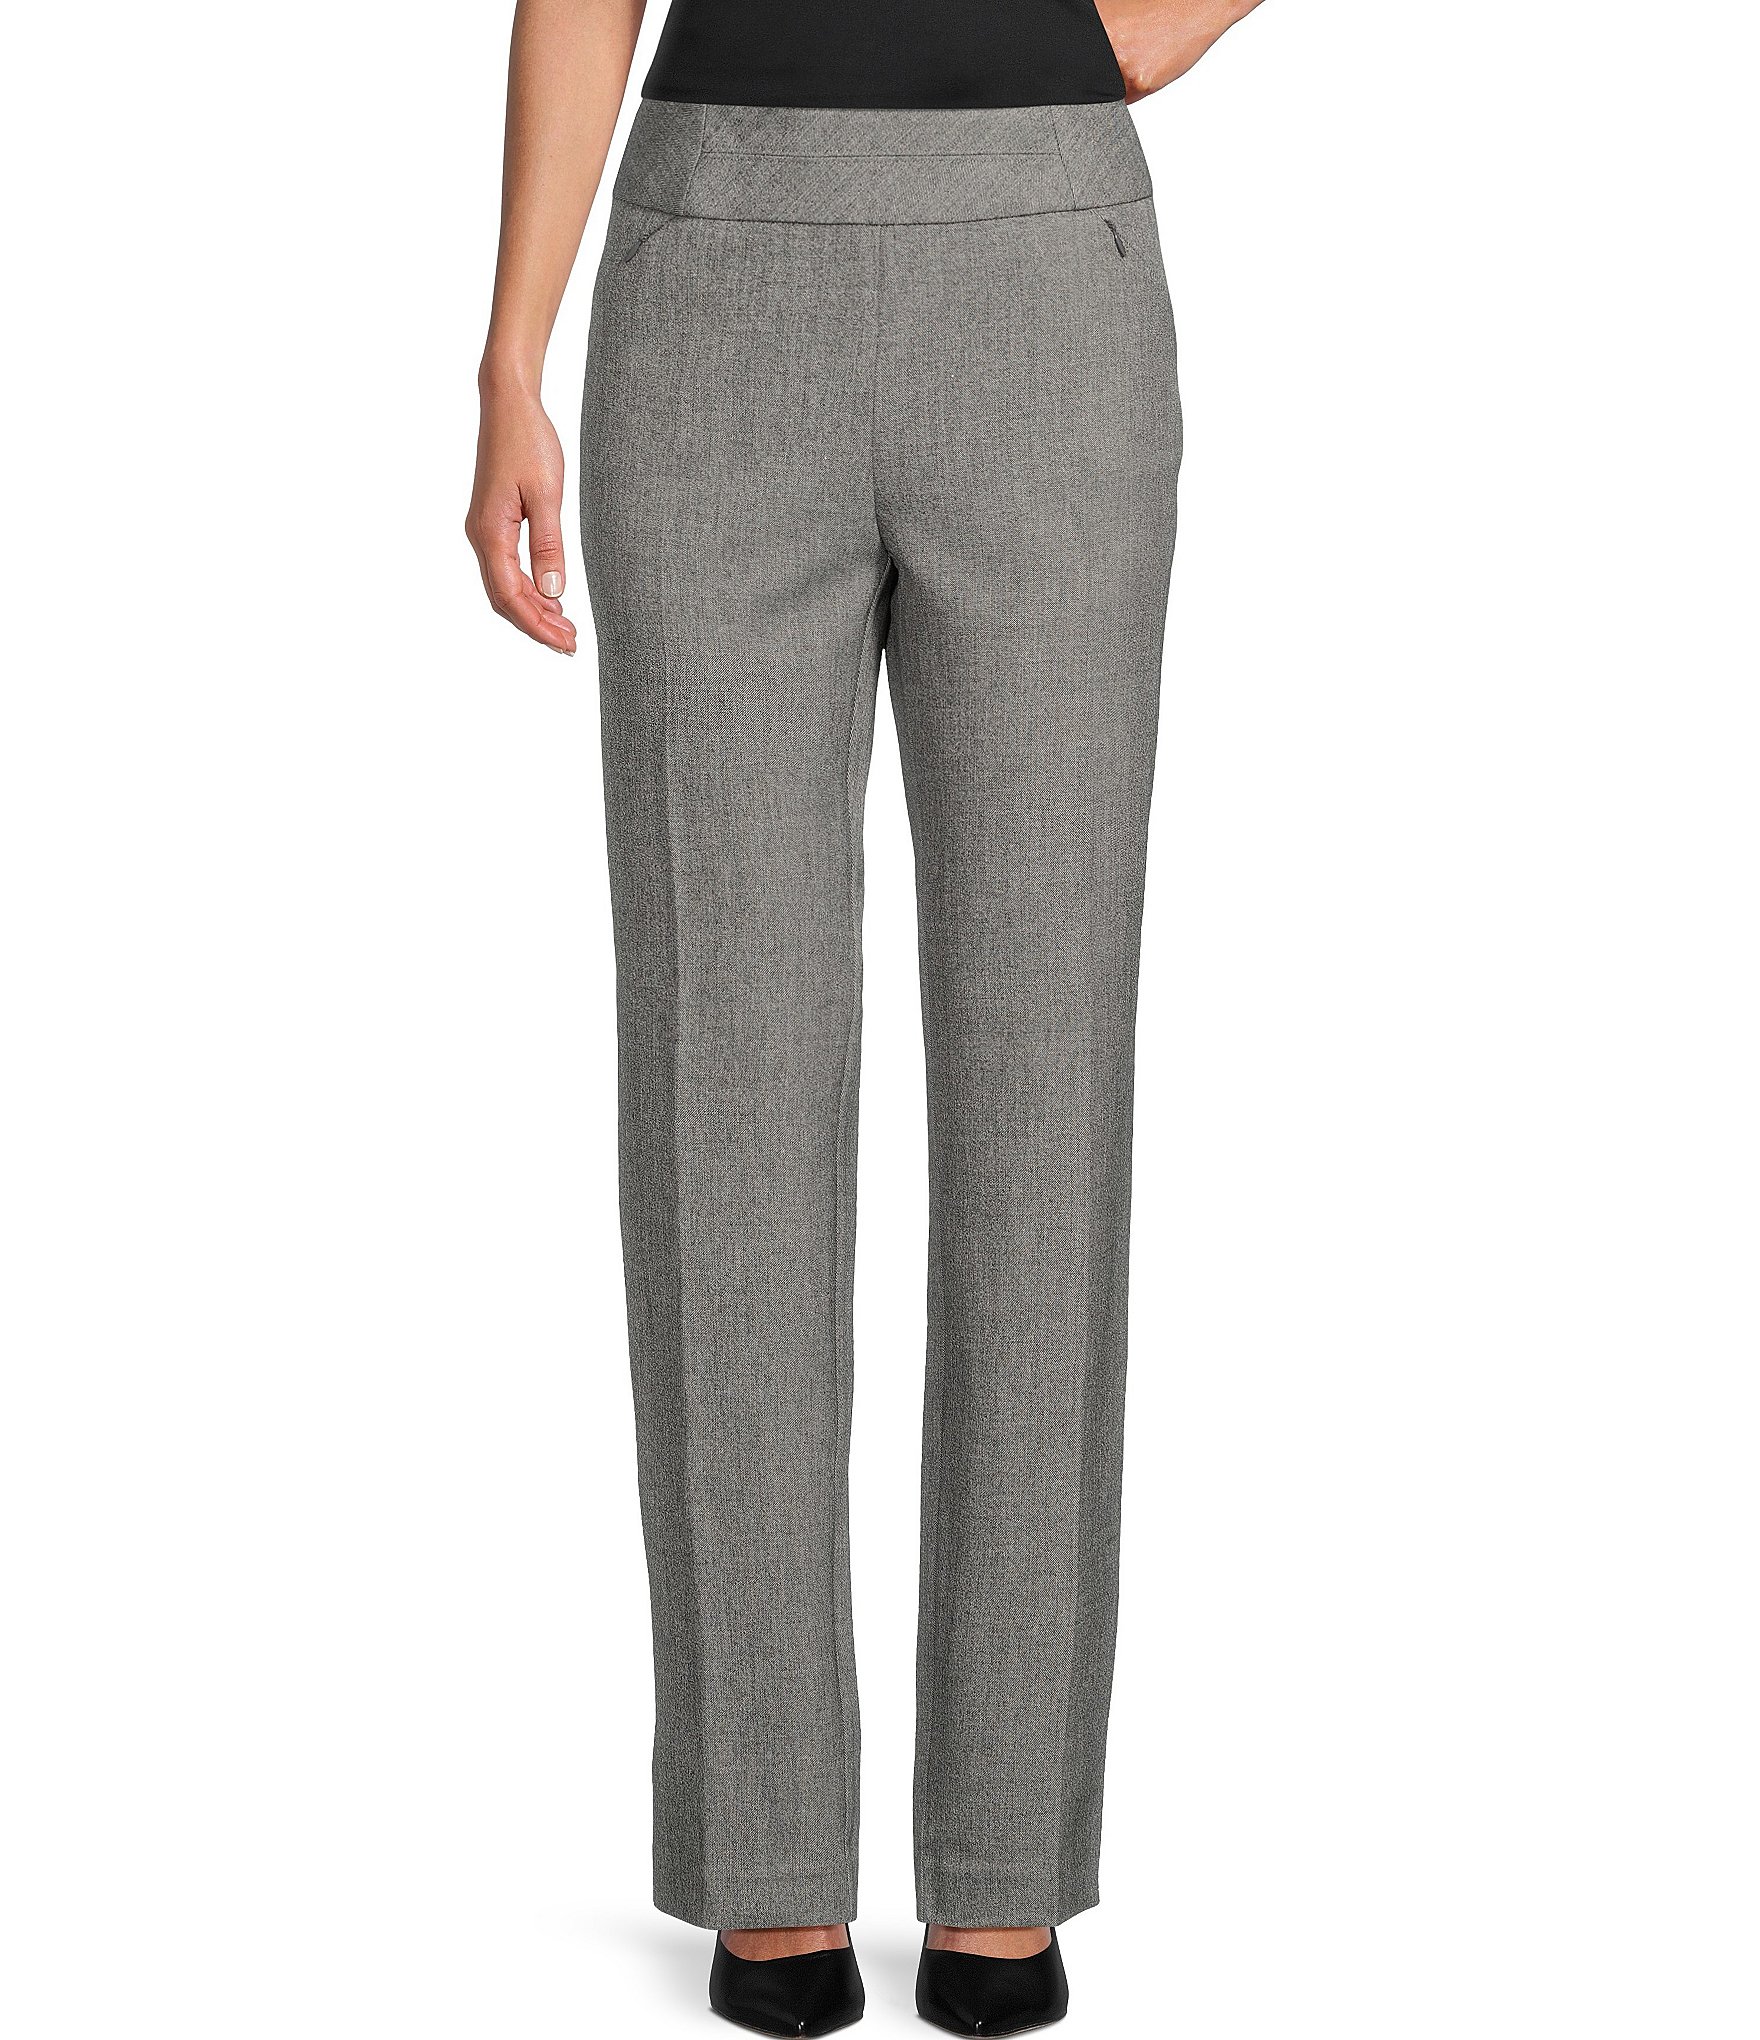 Sale Womens Grey Pants - Bottoms, Clothing